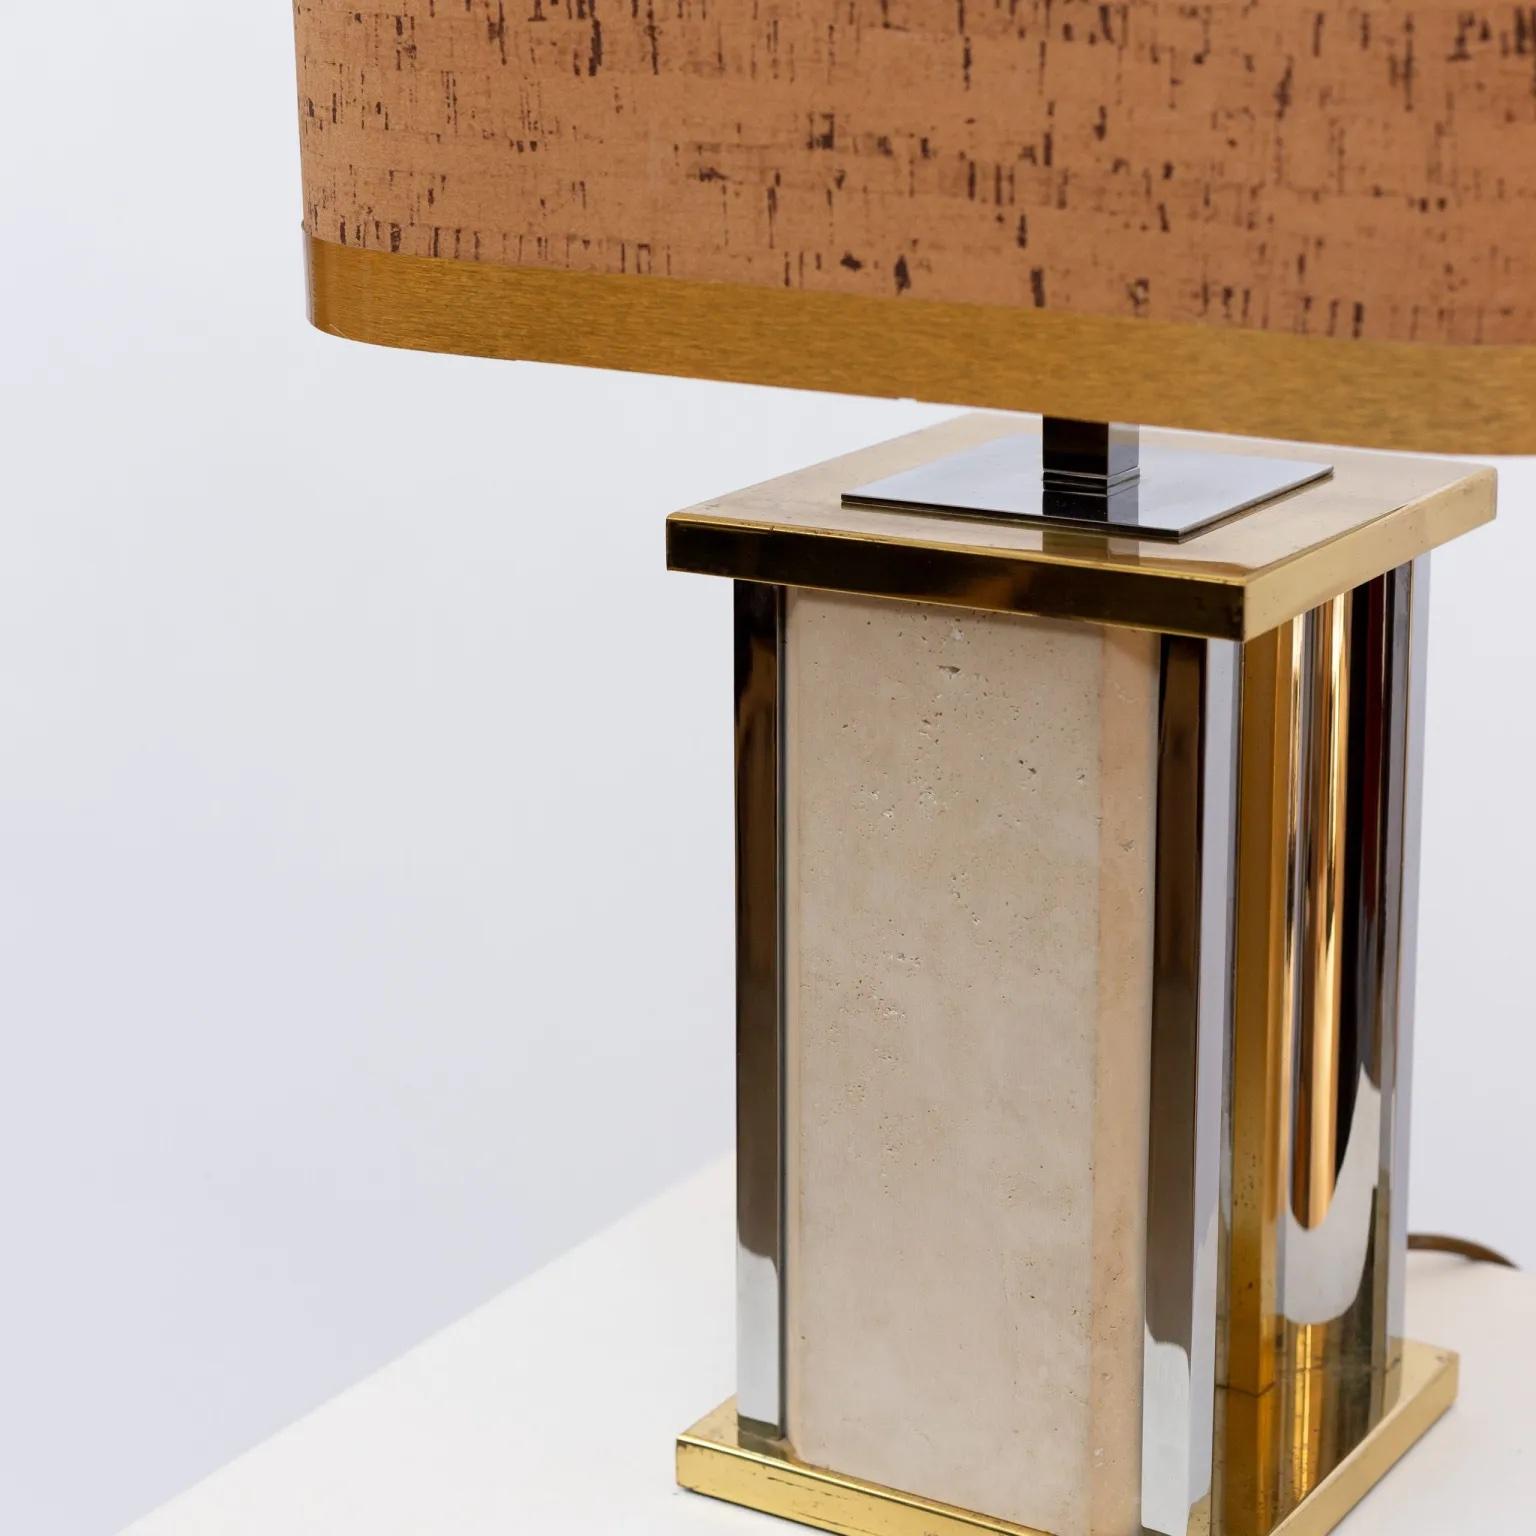 A large travertine marble and brass table lamp by Gaetano Sciolari. Retains the original rectangular cork hood shade. Signed on bottom of base.
Base dimensions (incl. lamp holder): 17x17x37 cm.